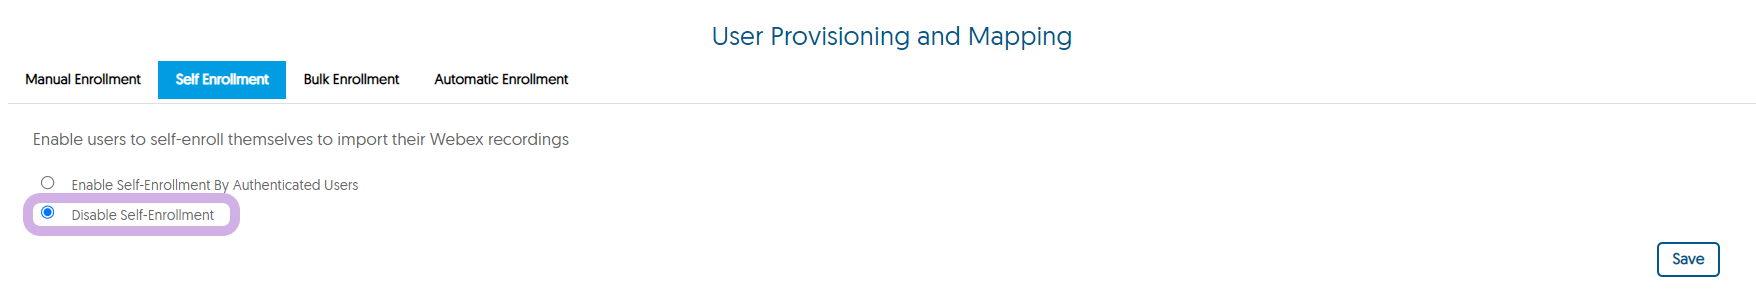 The User Provisioning and Mapping panel for Webex with Disable Self-Enrollment checked.